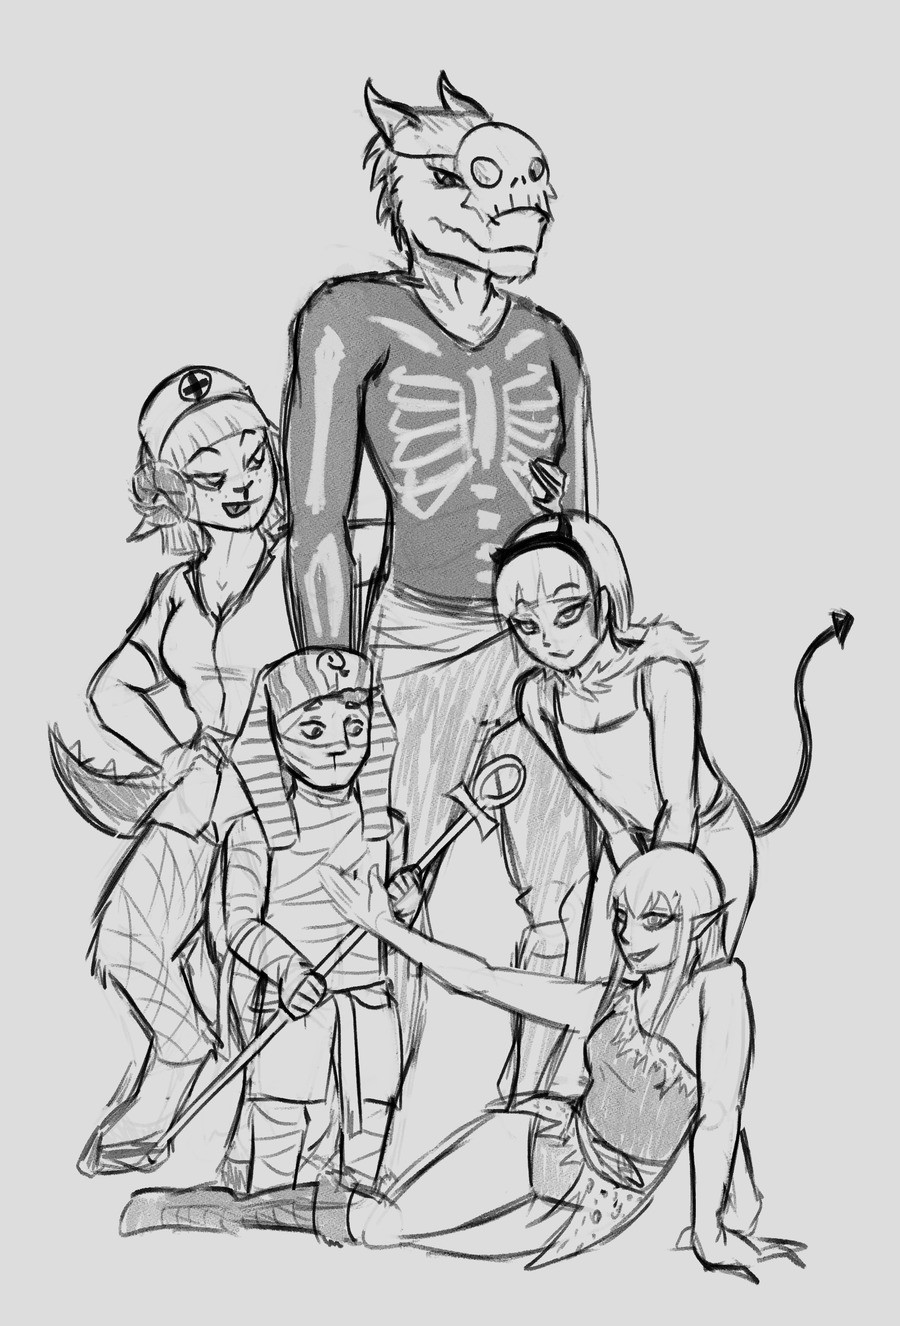 OCtober 2021 Day 31. And finally that brings us to Halloween, day 31 all dressed up for the holiday. Wanted to finish big with a group shot of my dnd party. I m